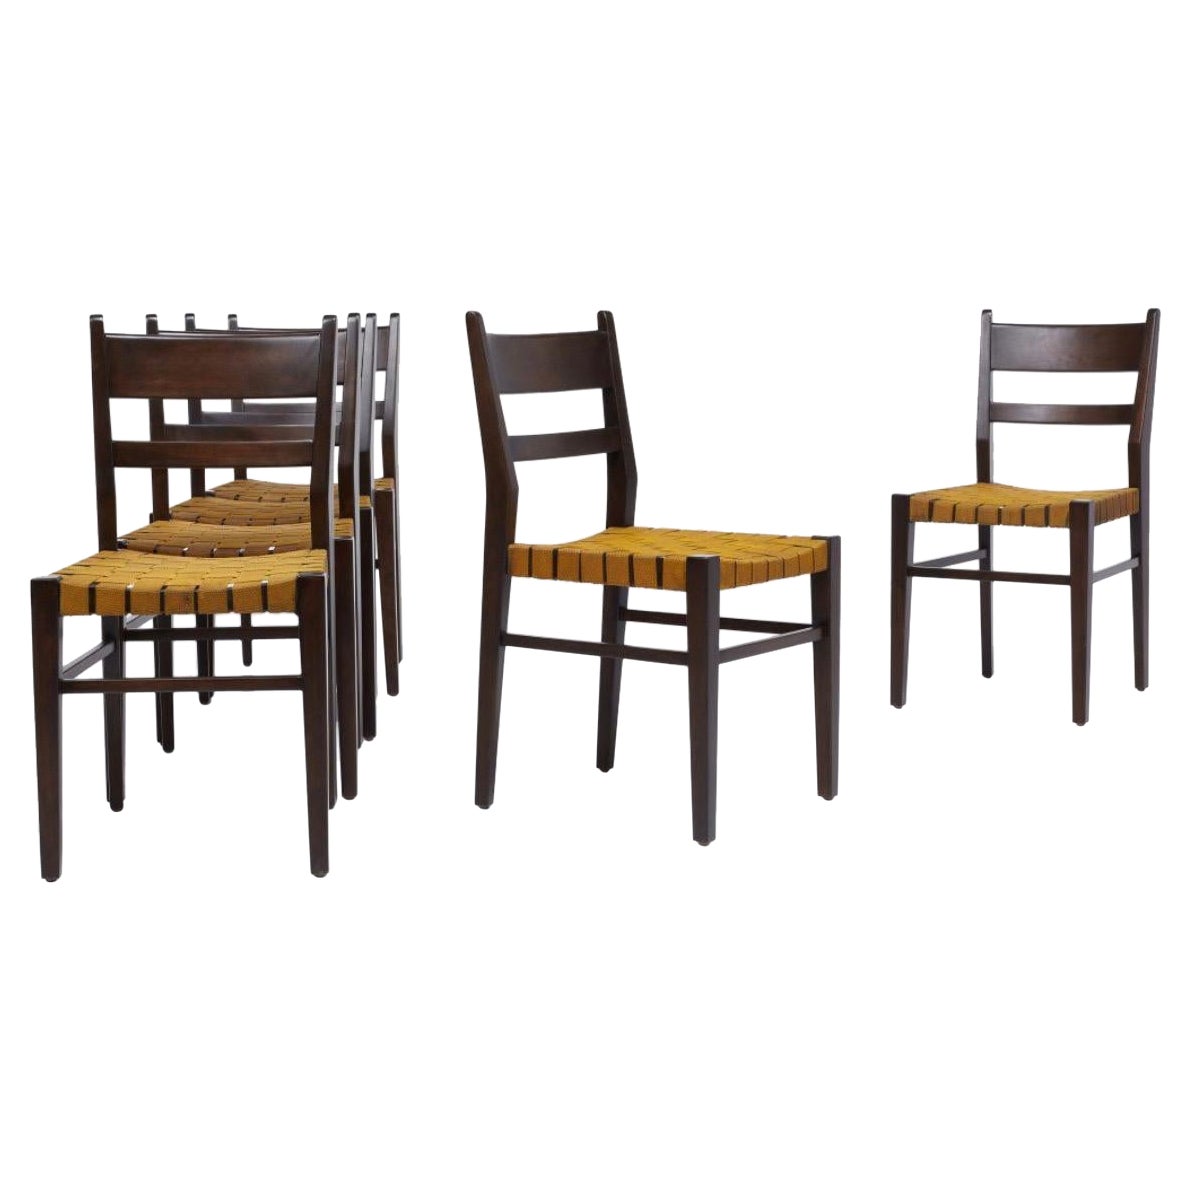 Edmond Spence Attributed 6 Mahogany Dining Chairs with Woven Seats, 1940s For Sale